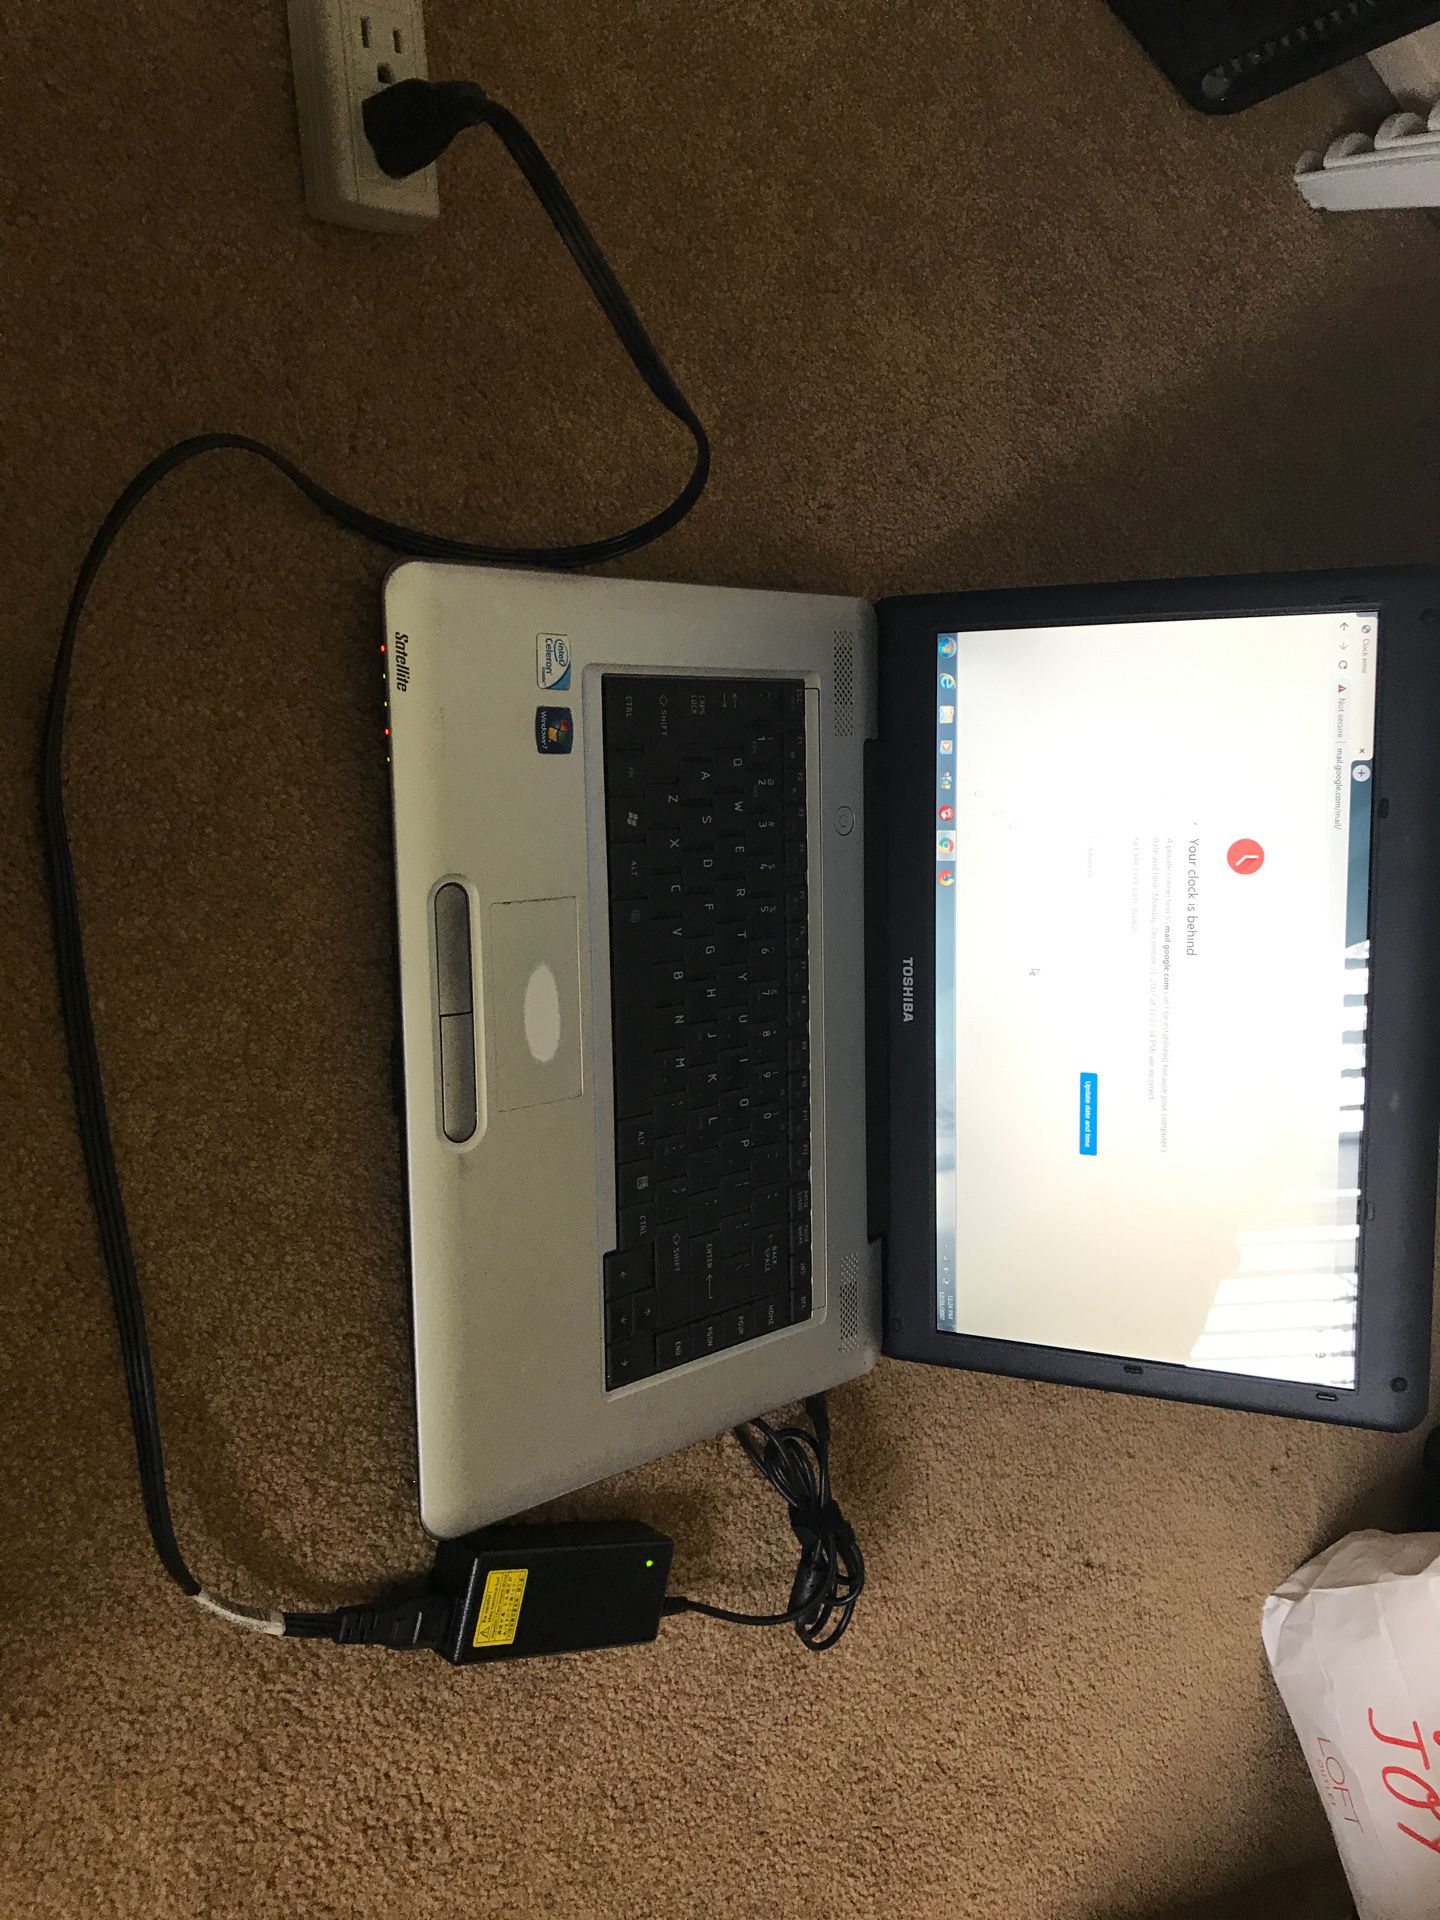 Toshiba used laptop works great with HDMI port and CD Player